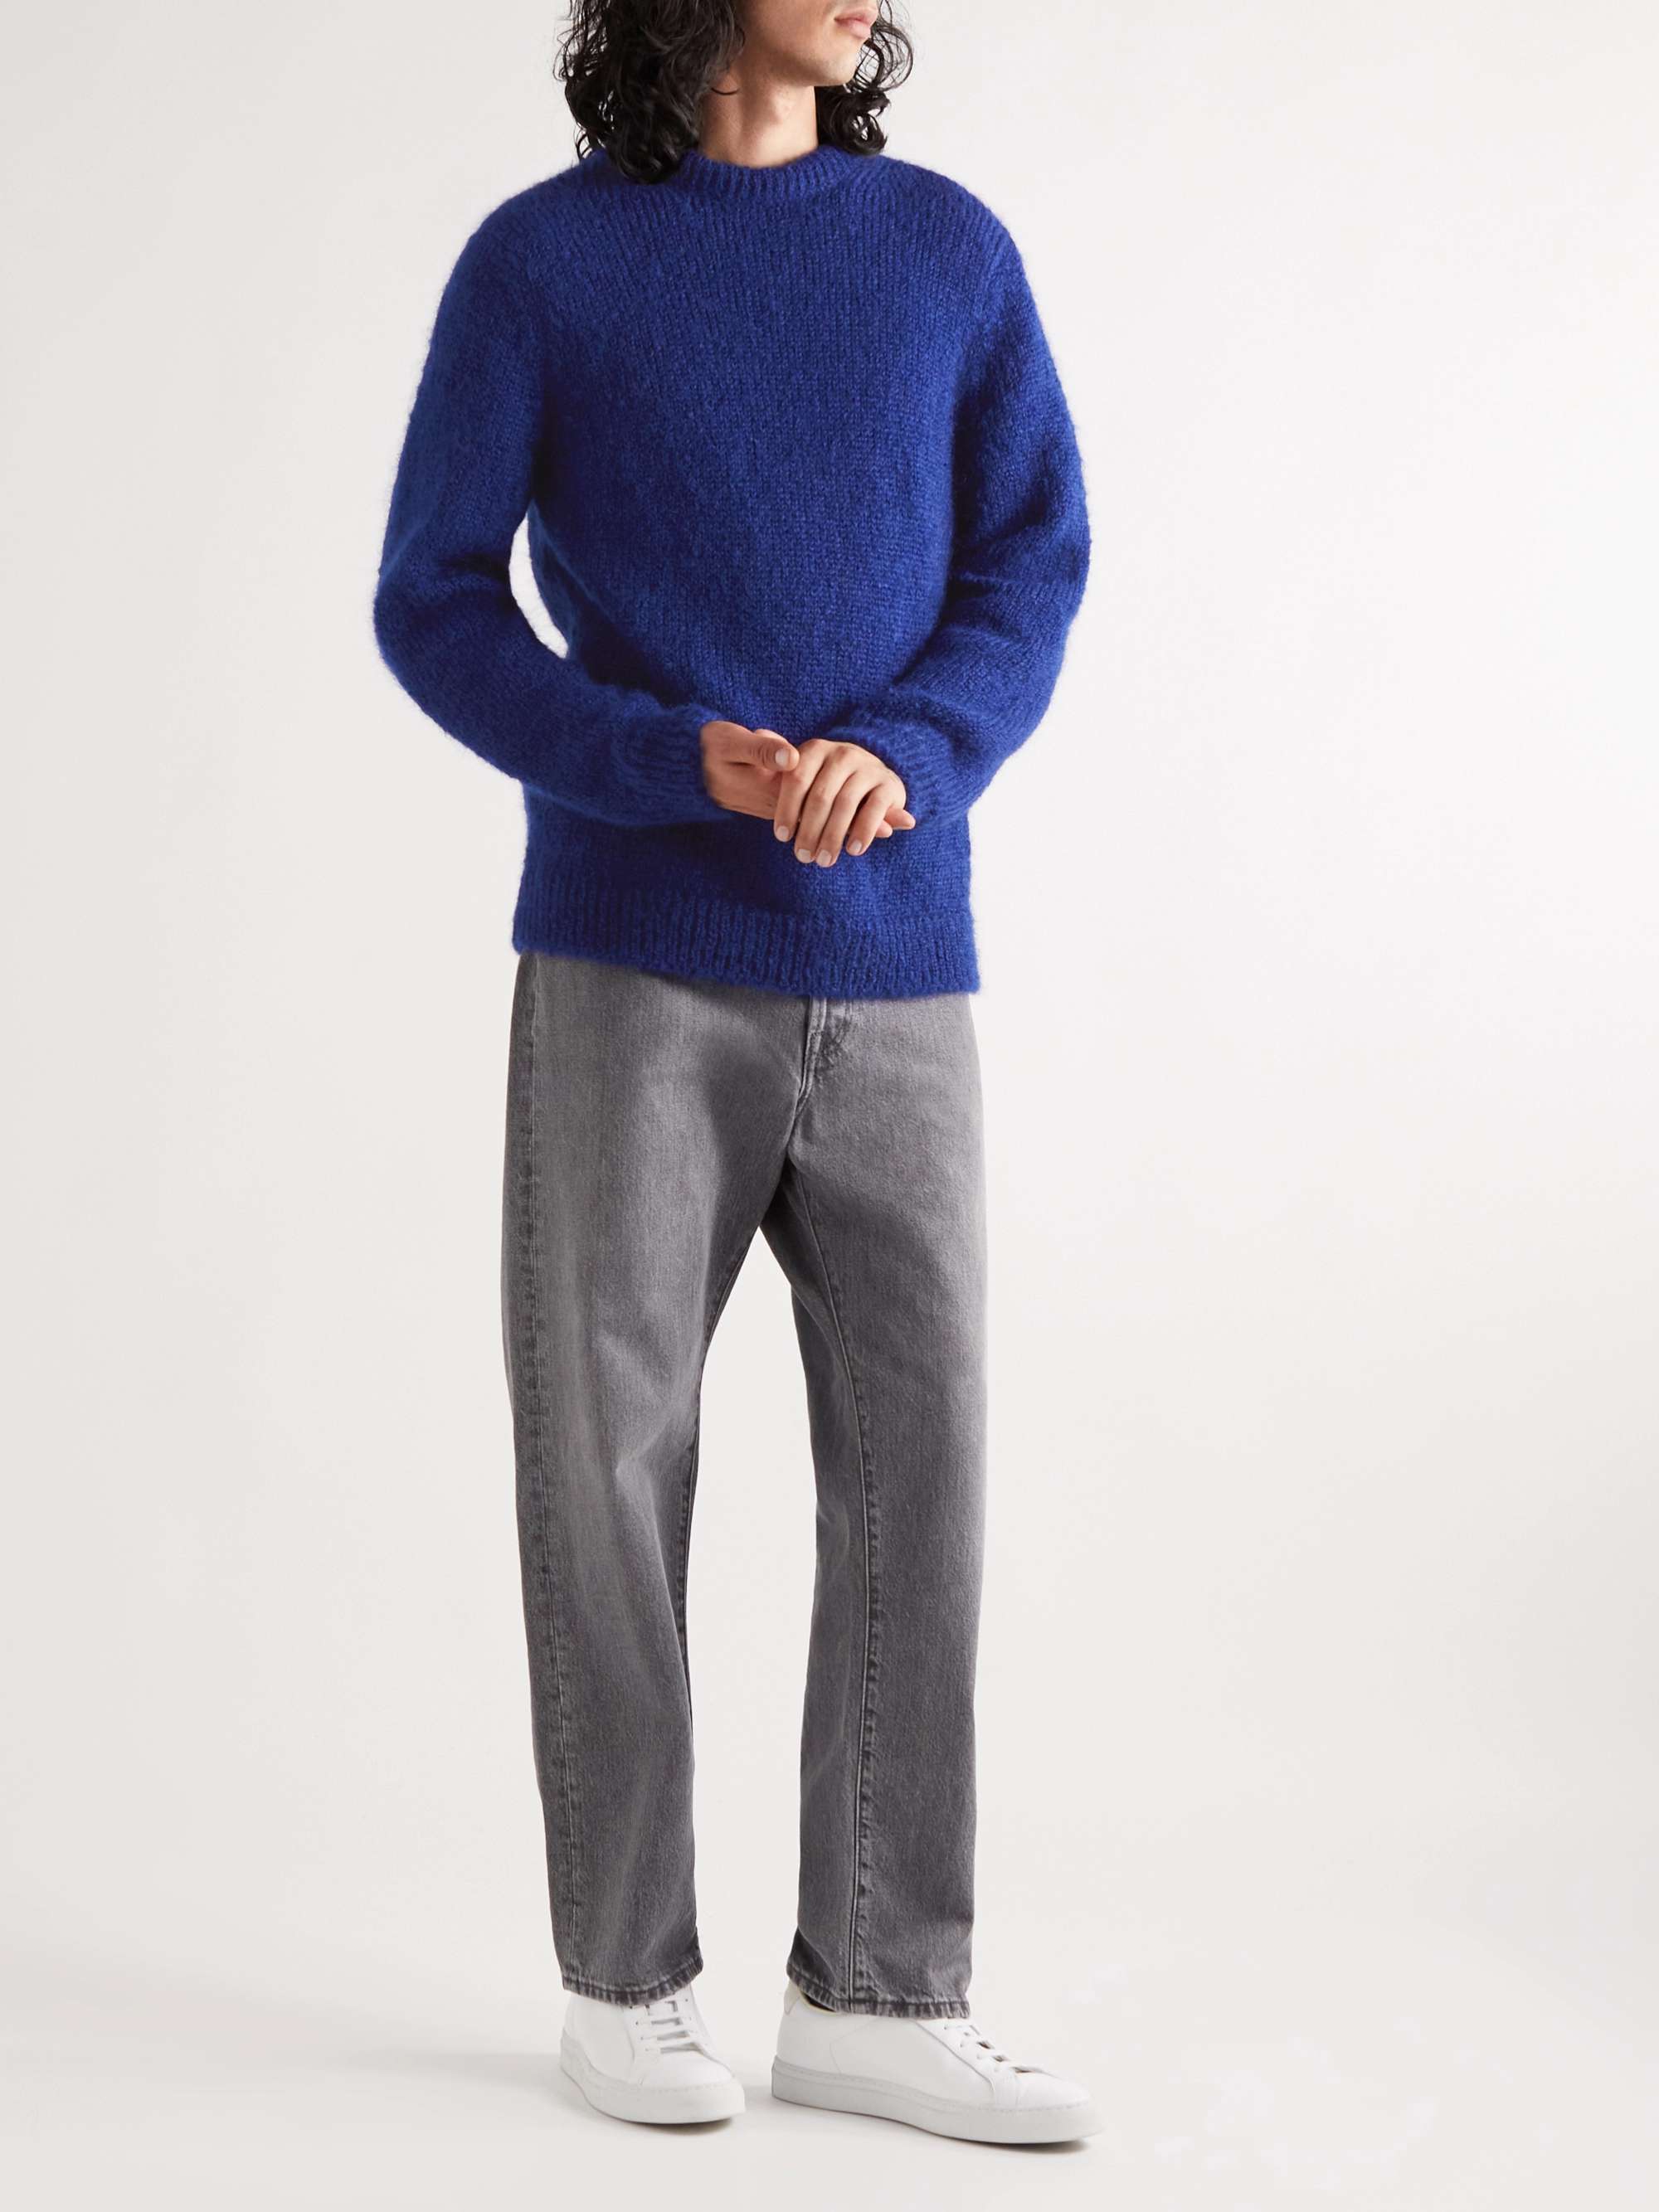 NUDIE JEANS August Mohair Sweater | MR PORTER